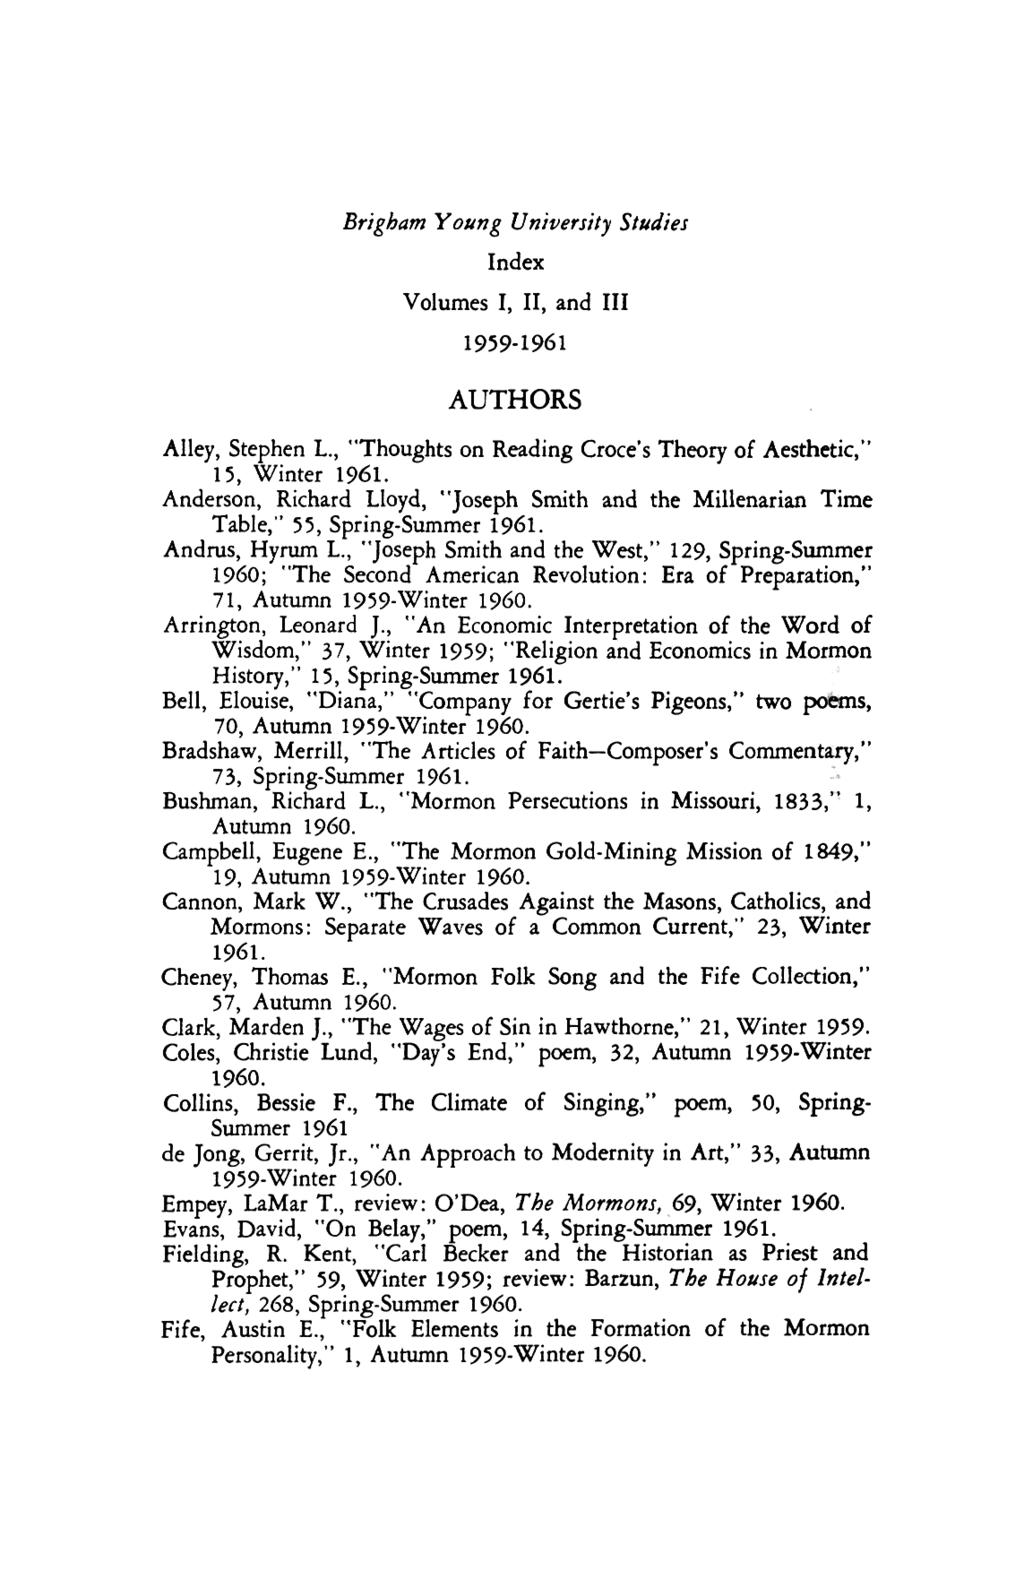 Studies: Index: Volumes I, II, and III alley stephen L brigham bigham young university studies volumes I1 index 1959 ili II 11 and III 111 AUTHORS thoughts on reading croce s theory of aesthetic 15